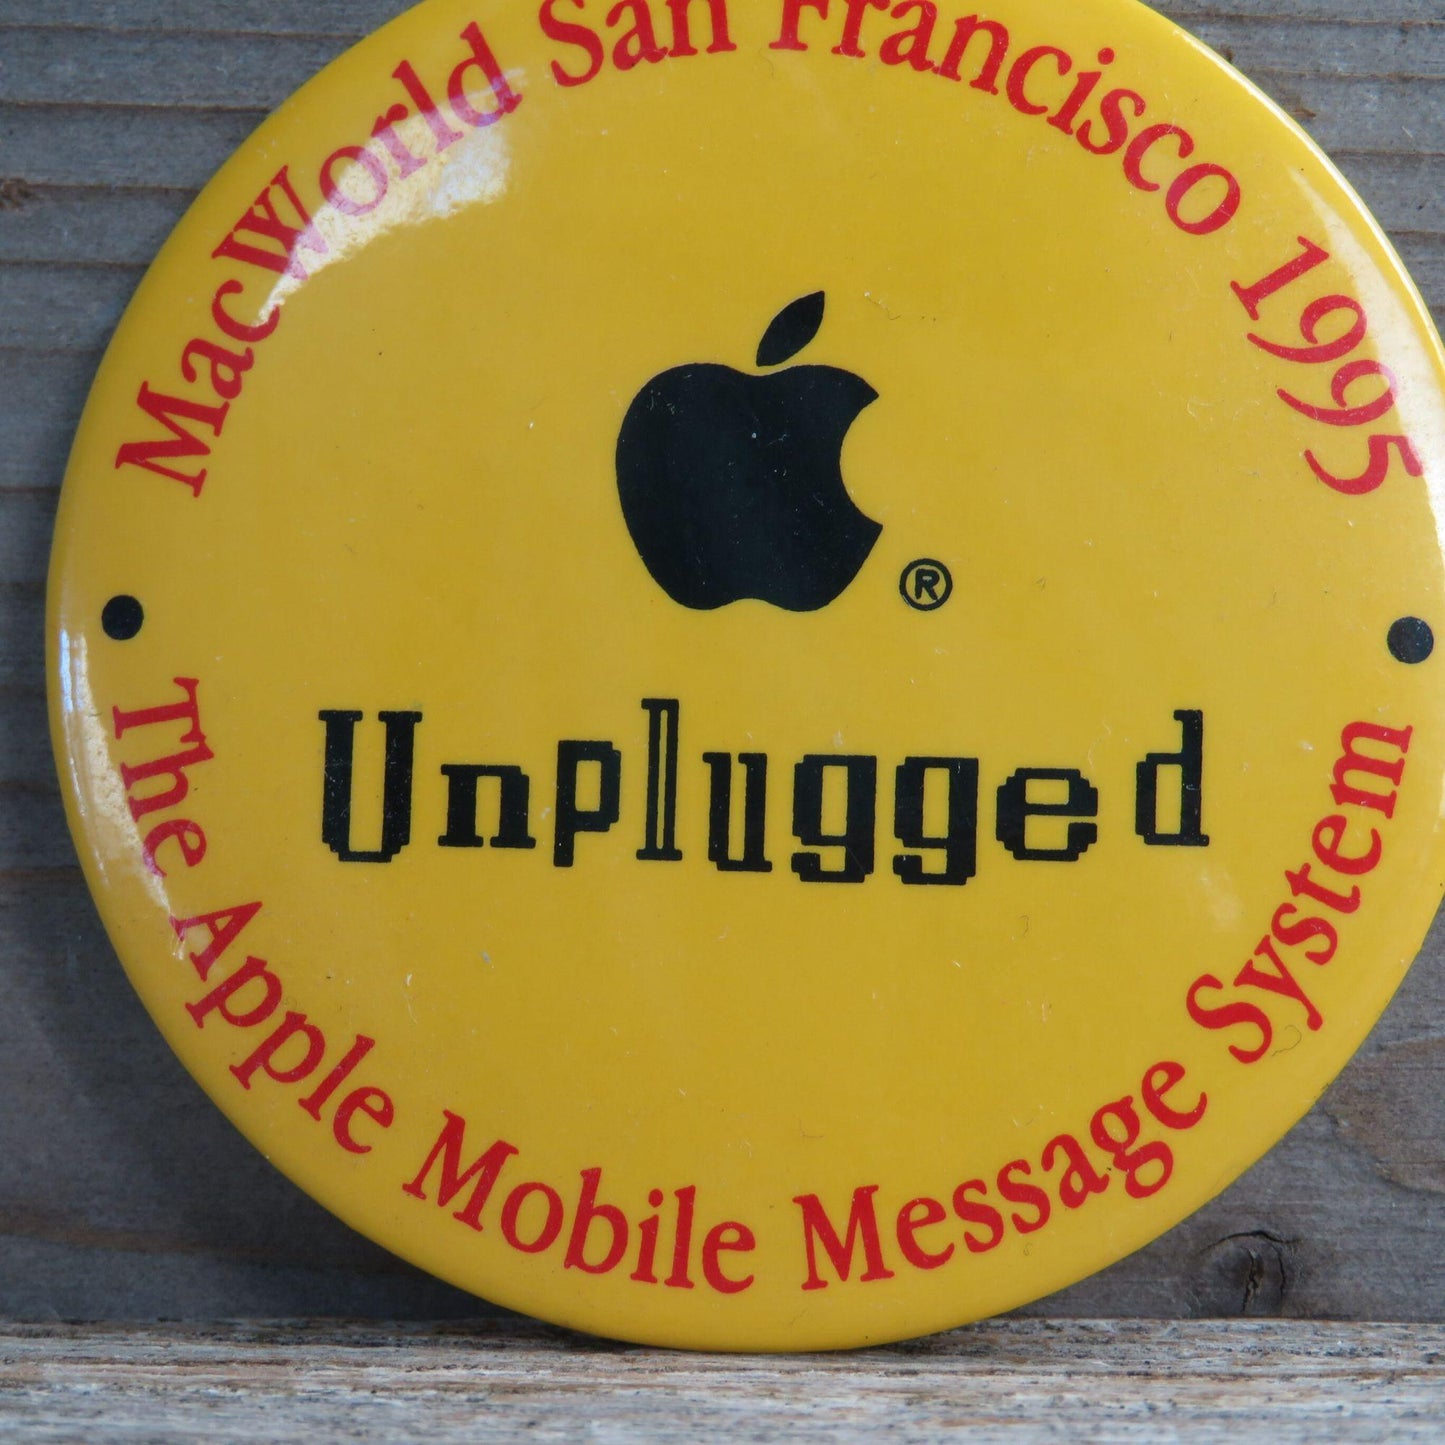 Vintage MacWorld San Francisco Button The Apple Mobile Message System UnPlugged Pin 1995 Macintosh Convention